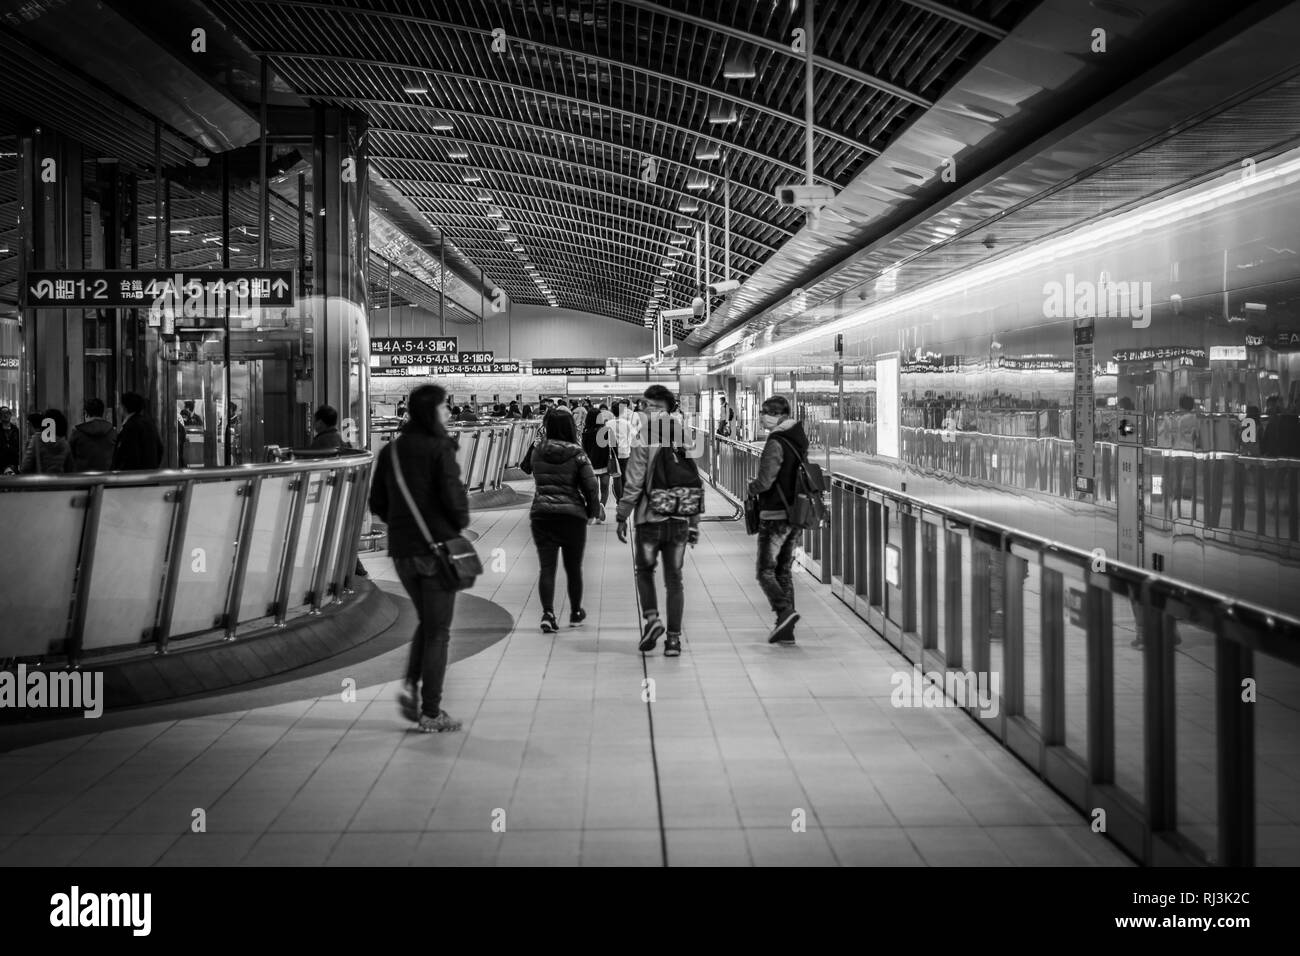 Mrt station Black and White Stock Photos & Images - Alamy